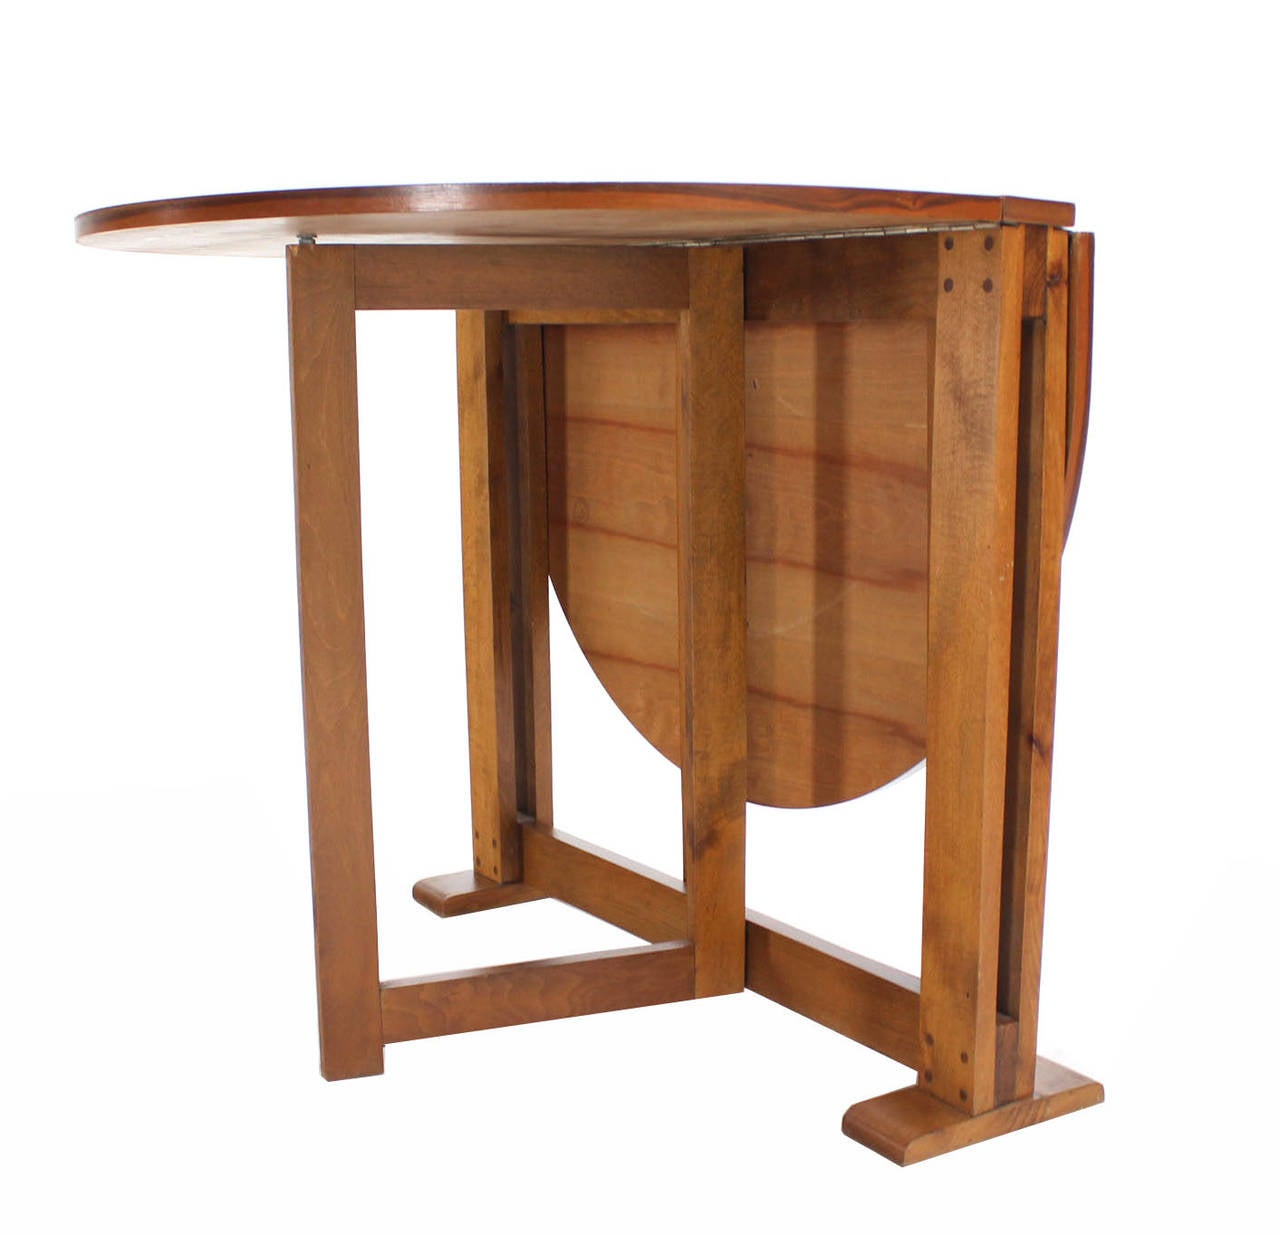 Low profile drop leaf table that expands into nice size 34x46 inches dining table.